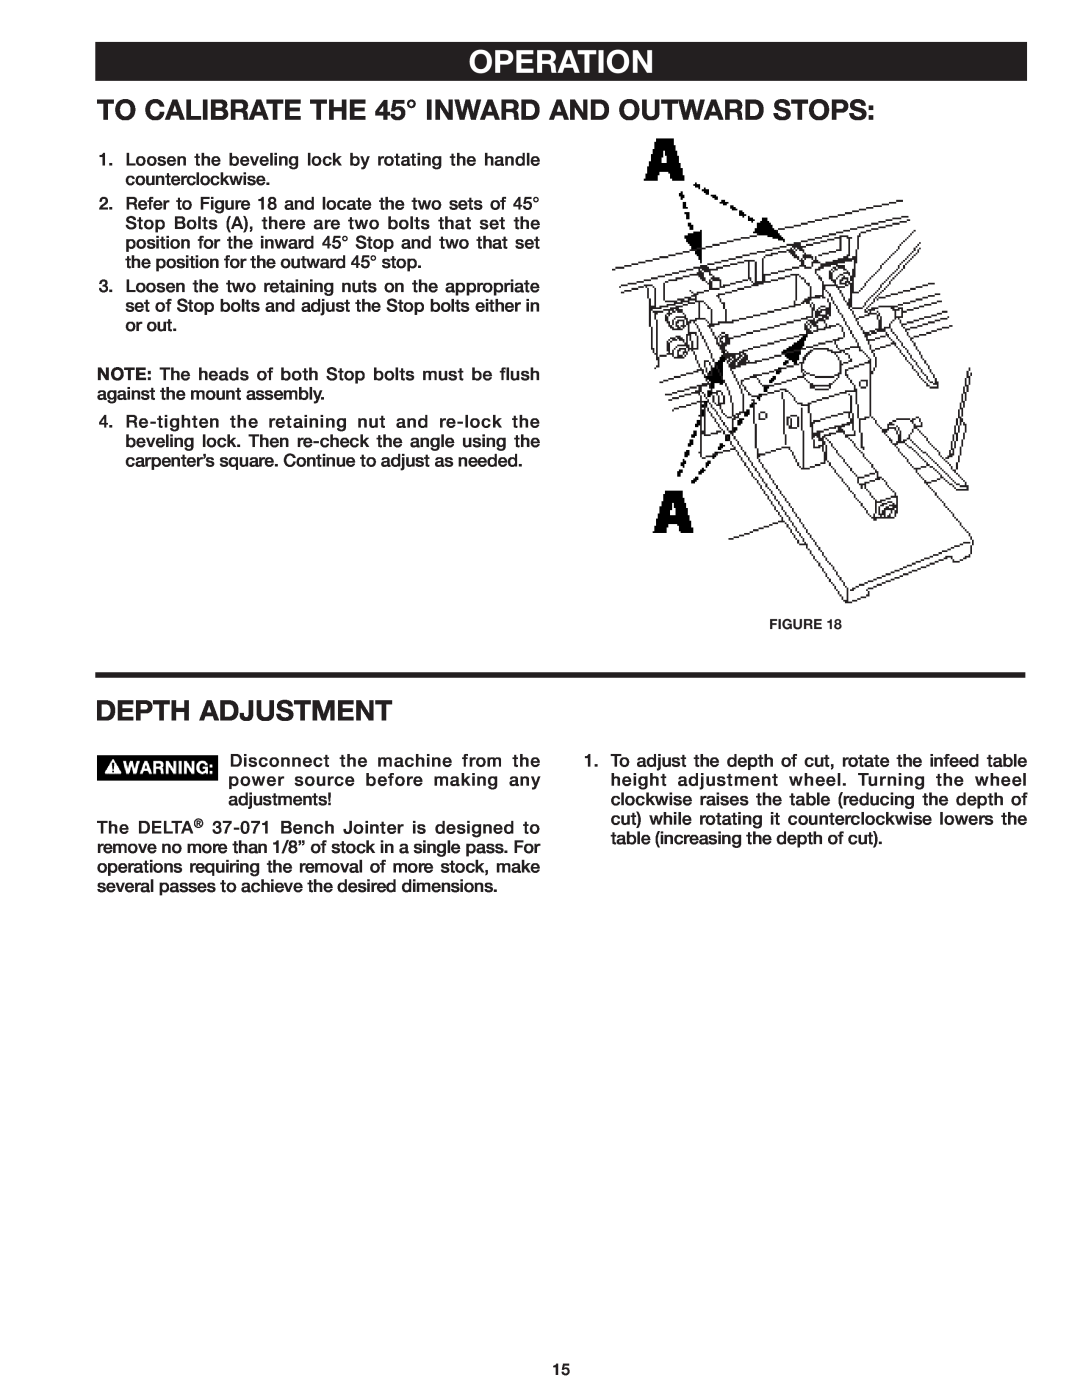 Delta 37-071 instruction manual TO CALIBRATE THE 45 INWARD AND OUTWARD STOPS, Depth Adjustment, Operation 